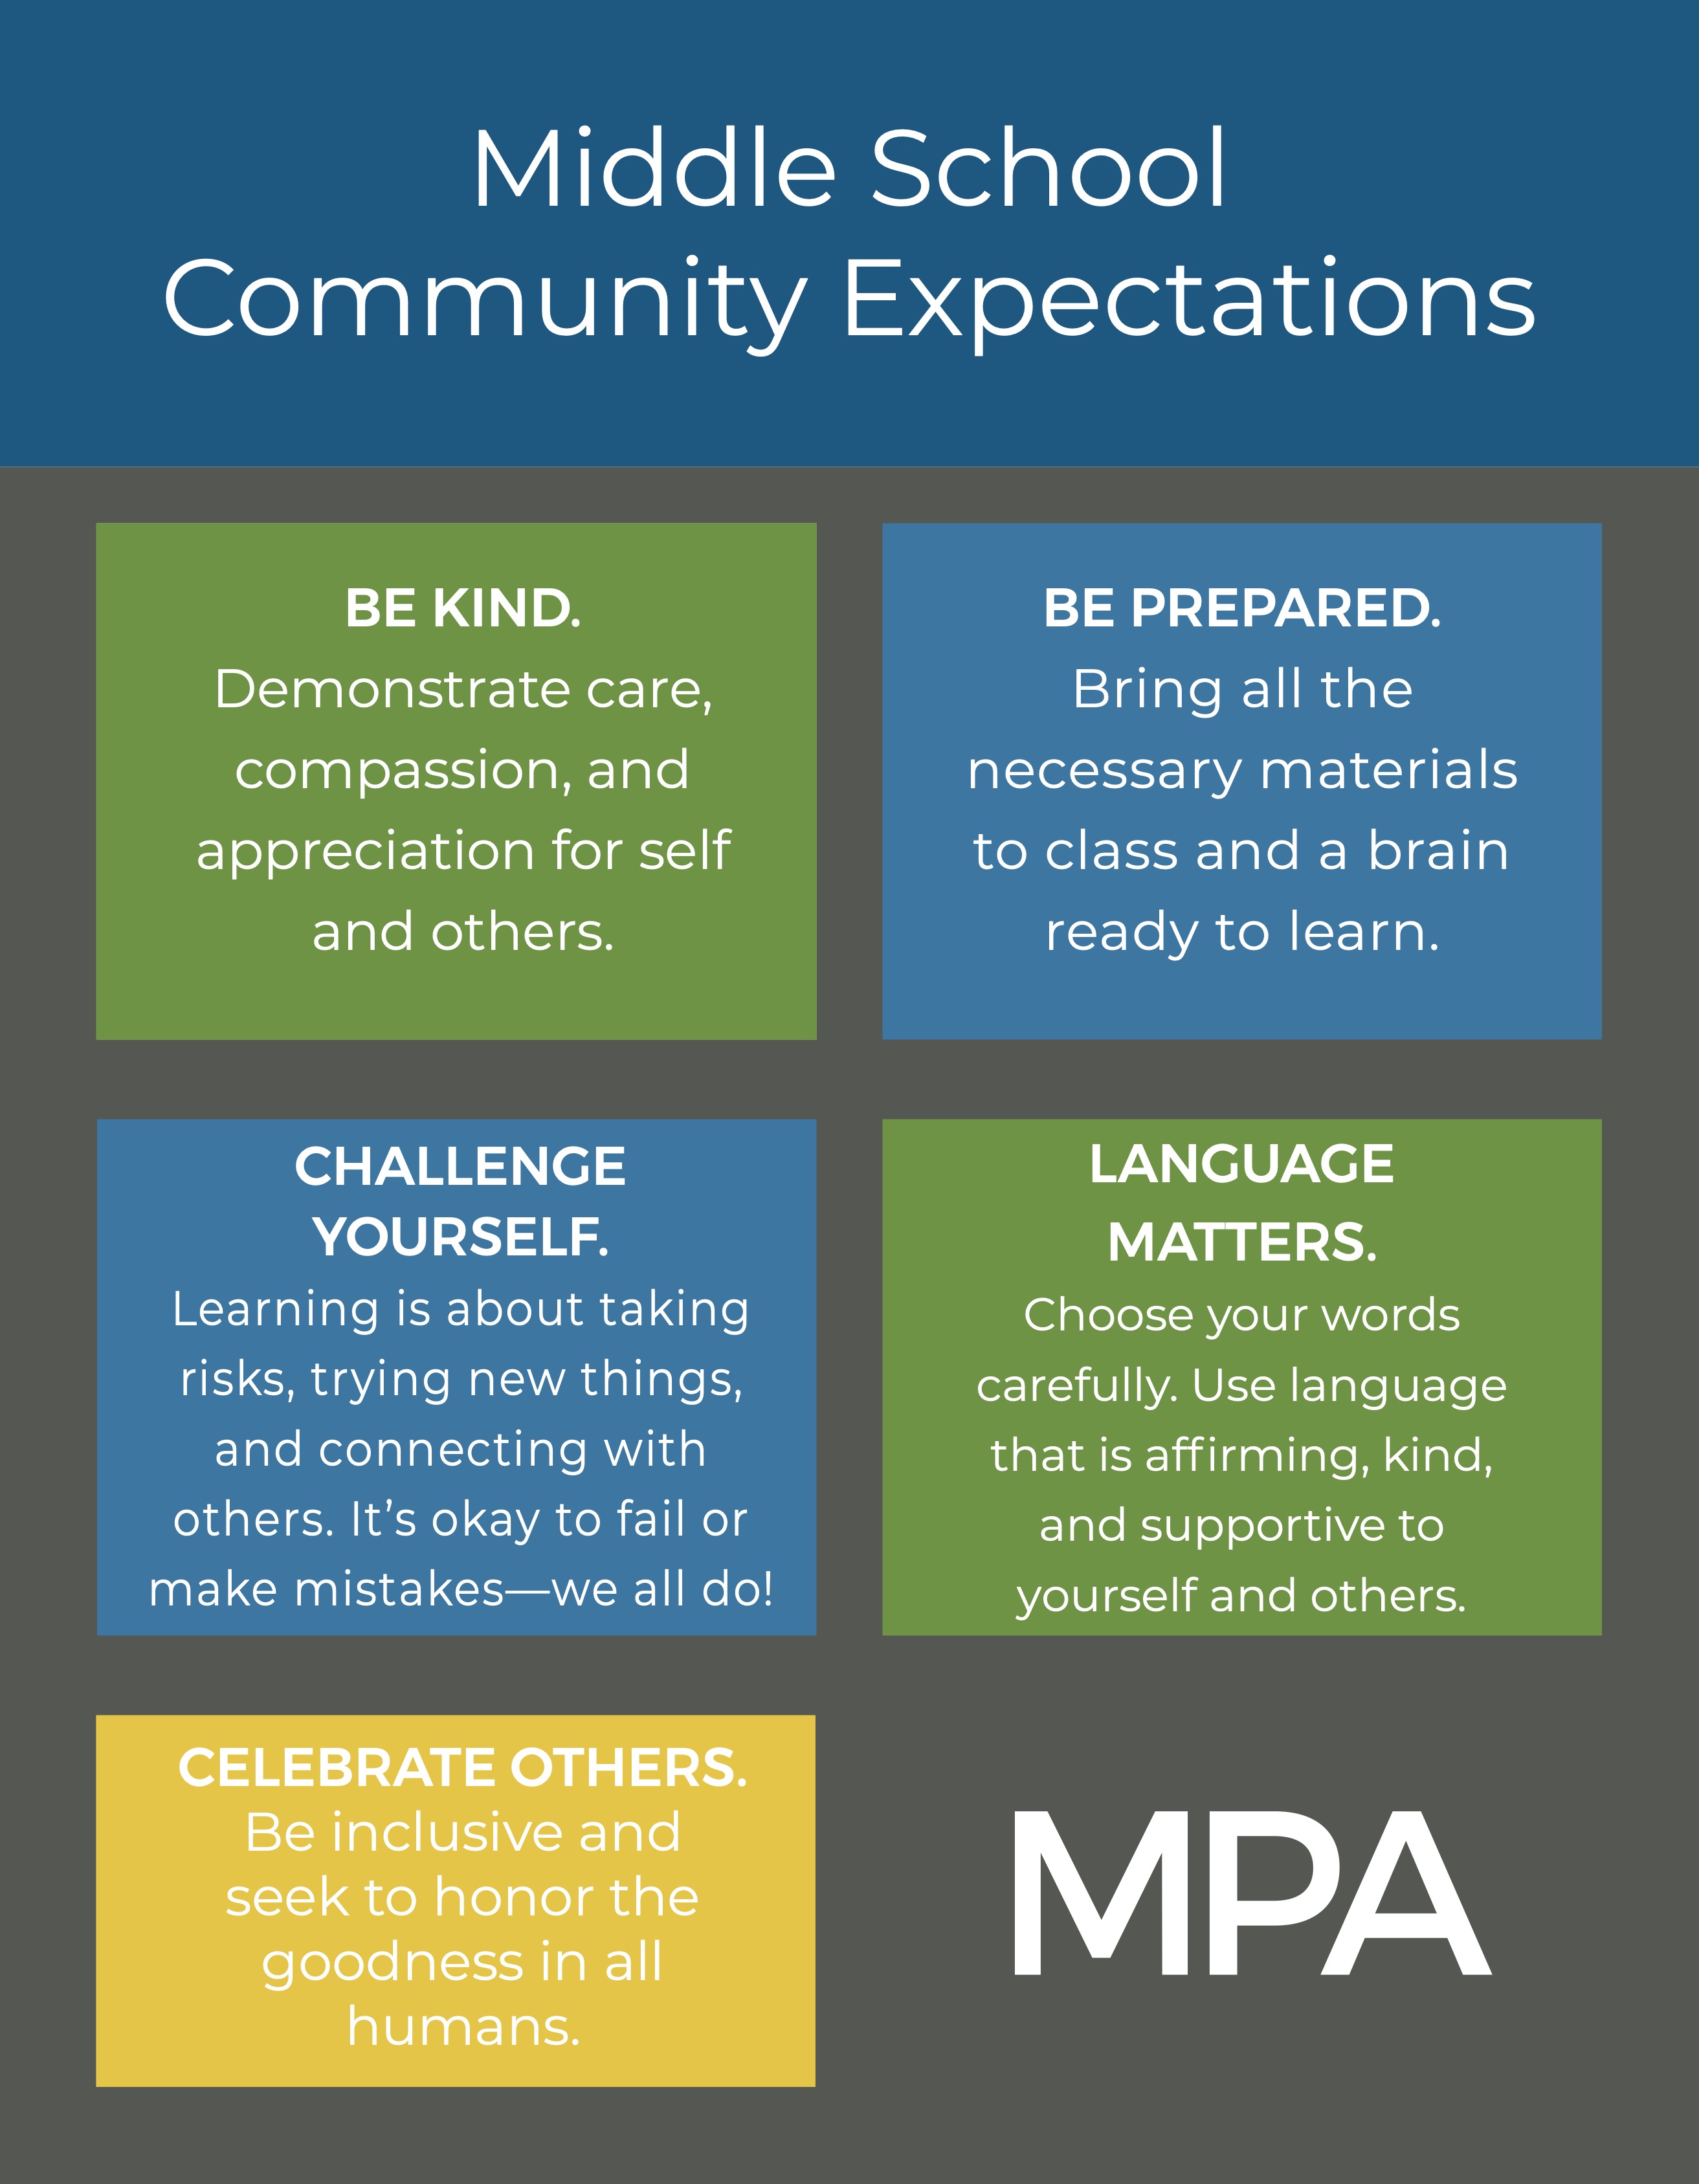 Middle School Community Expectations